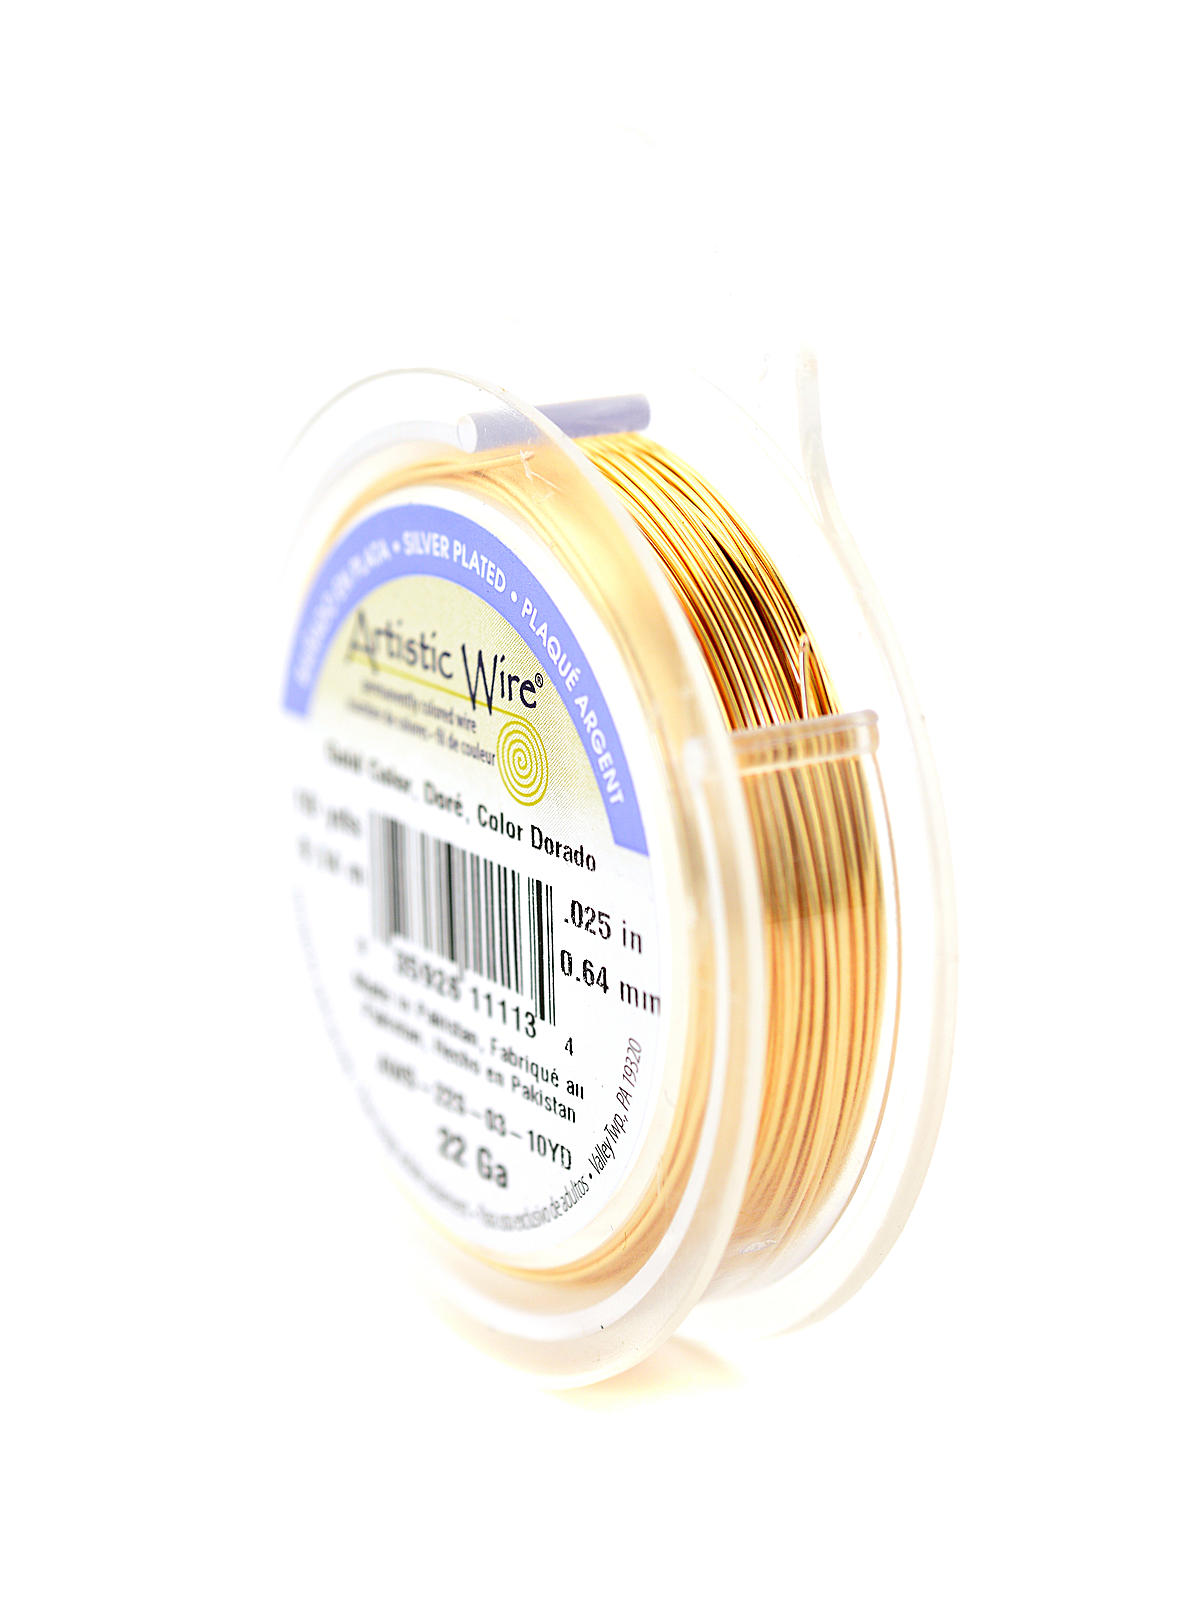 Spools 10 Yds. Gold 22 Gauge, Silver Plated